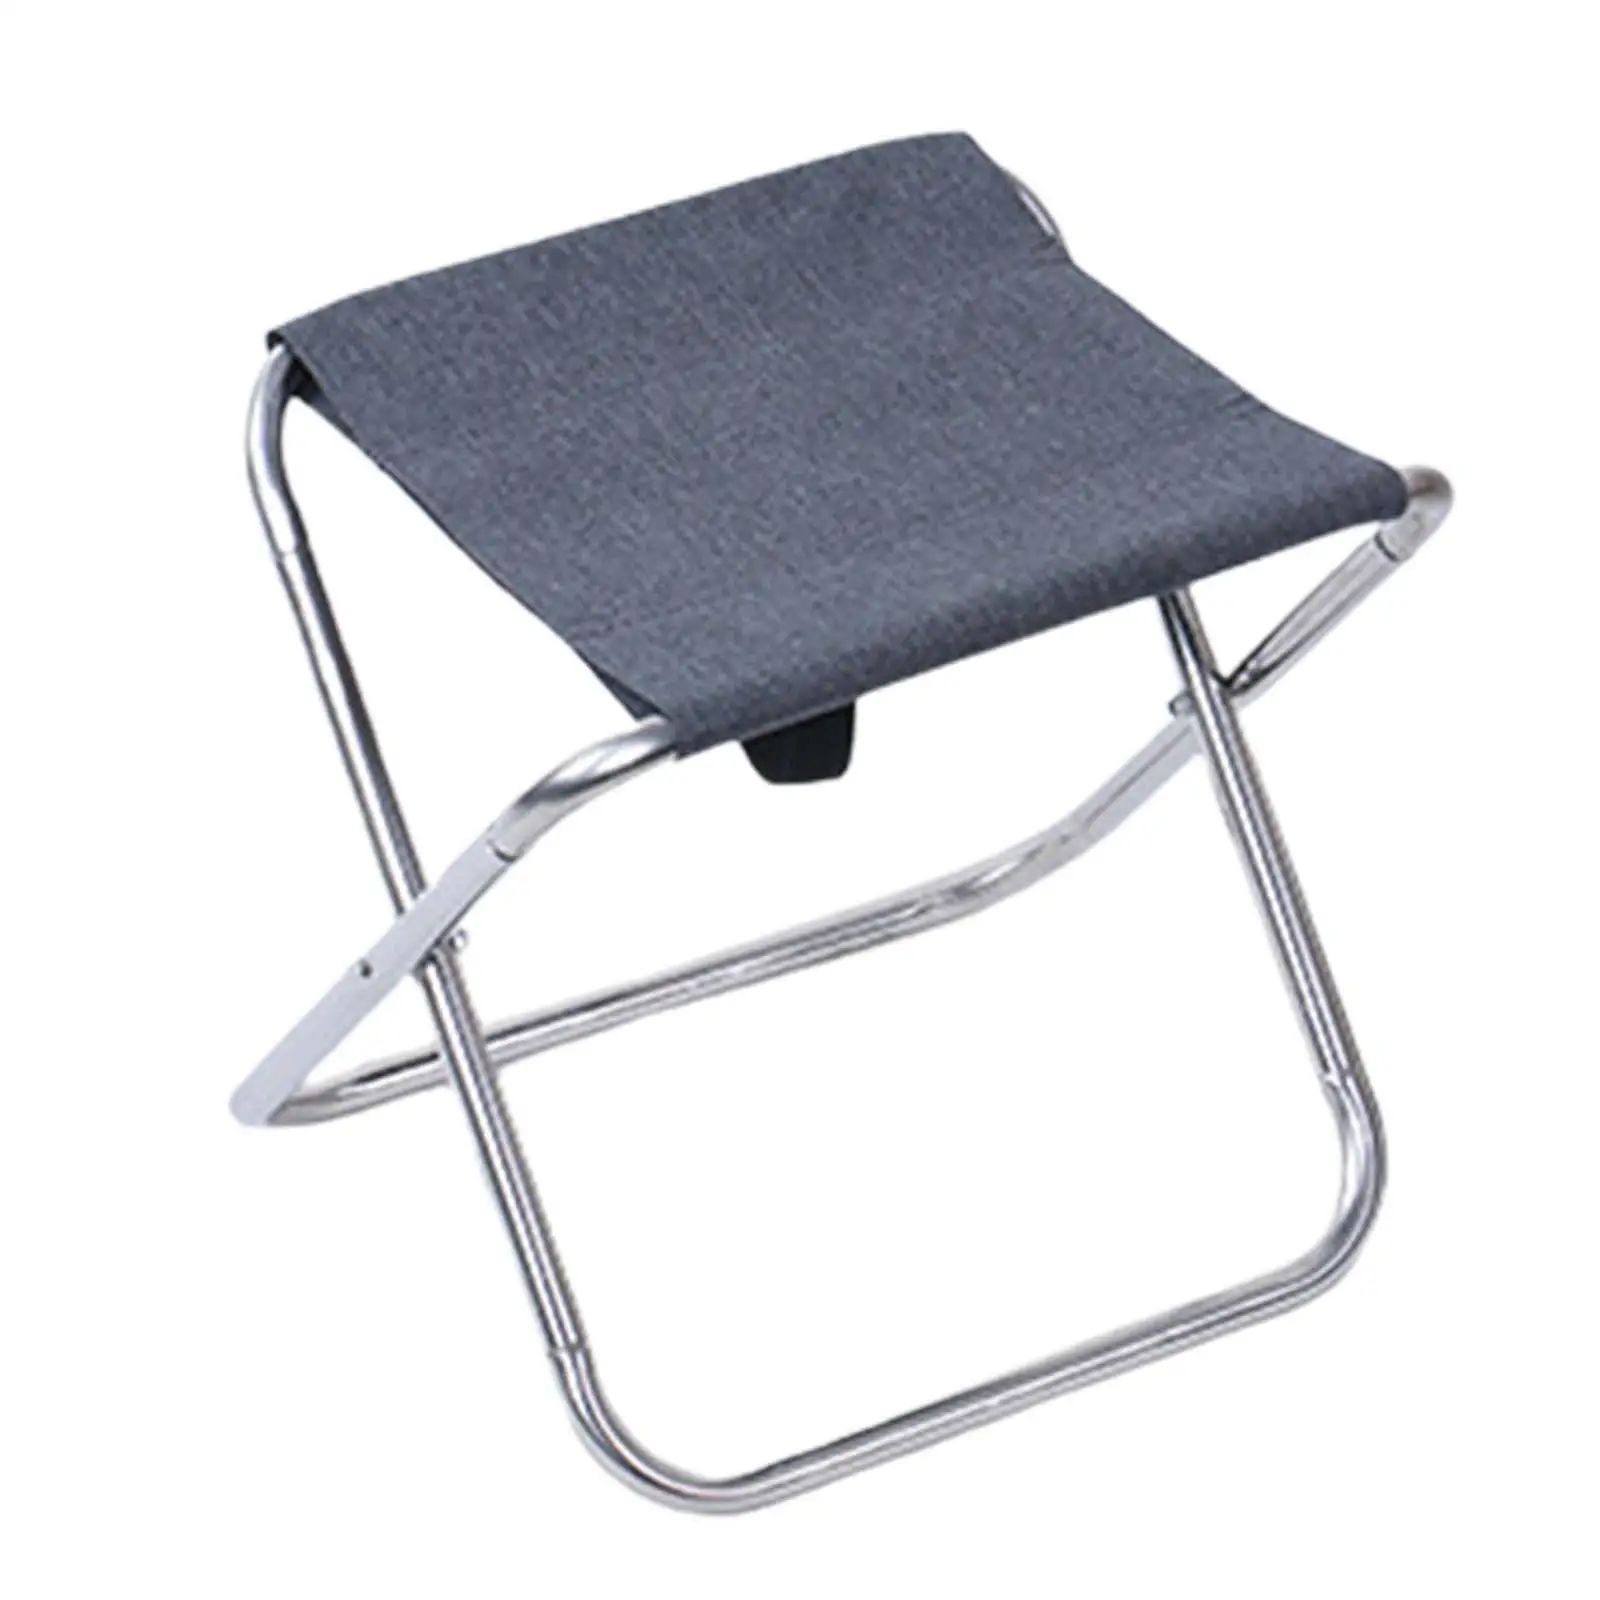 Camping Stool Folding Lightweight Mini Camping Chair Adults Fishing Seat Saddle Chair for Picnic Gardening Concert Party Lawn